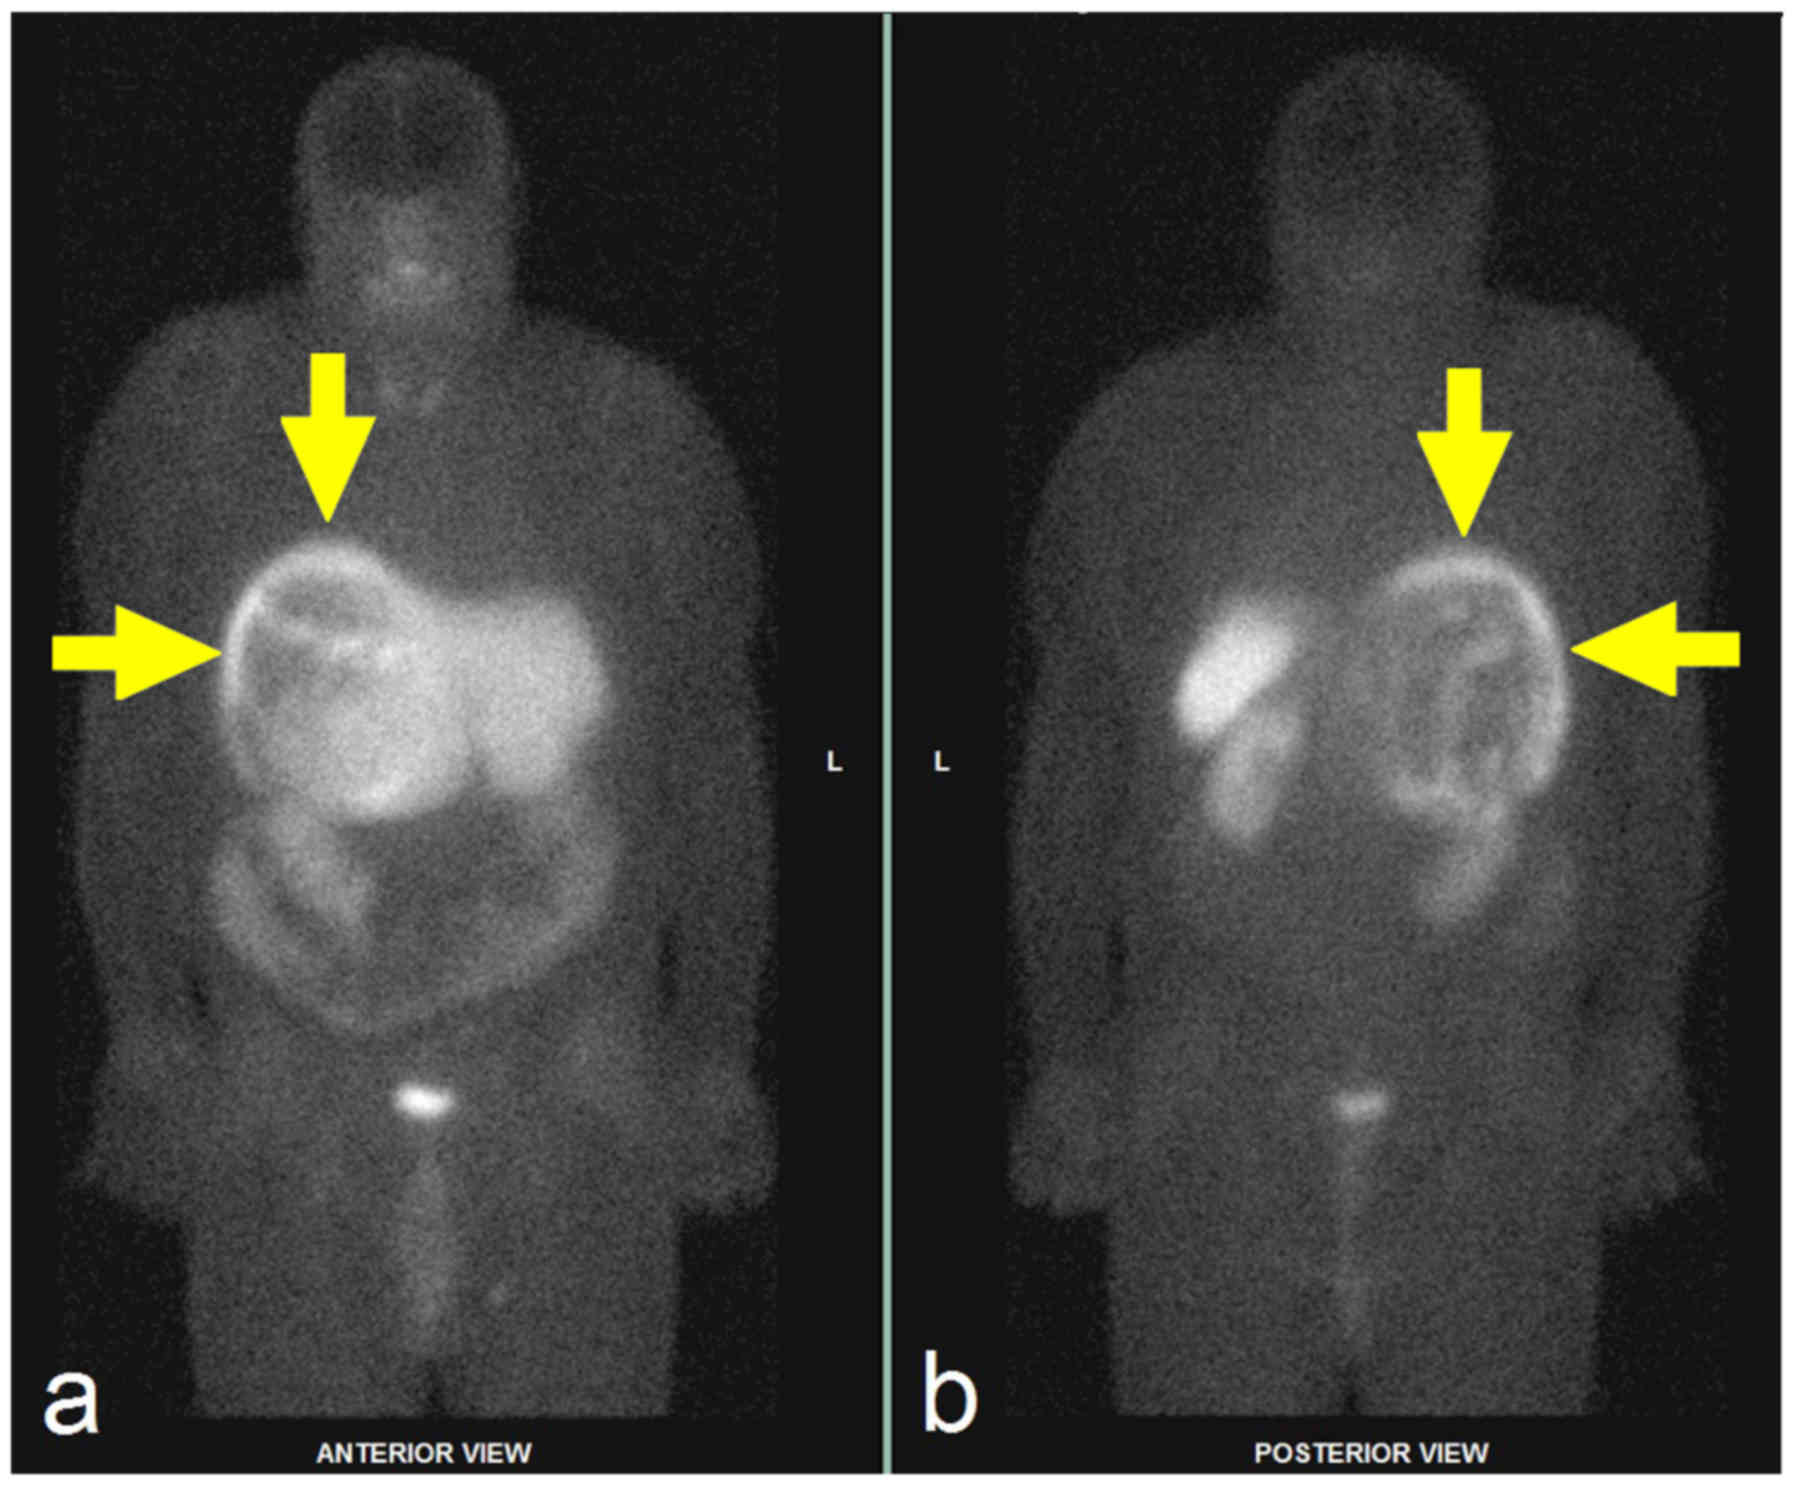 99mTc-HYNIC-TOC scintigraphy in a patient with atypical giant paraganglioma